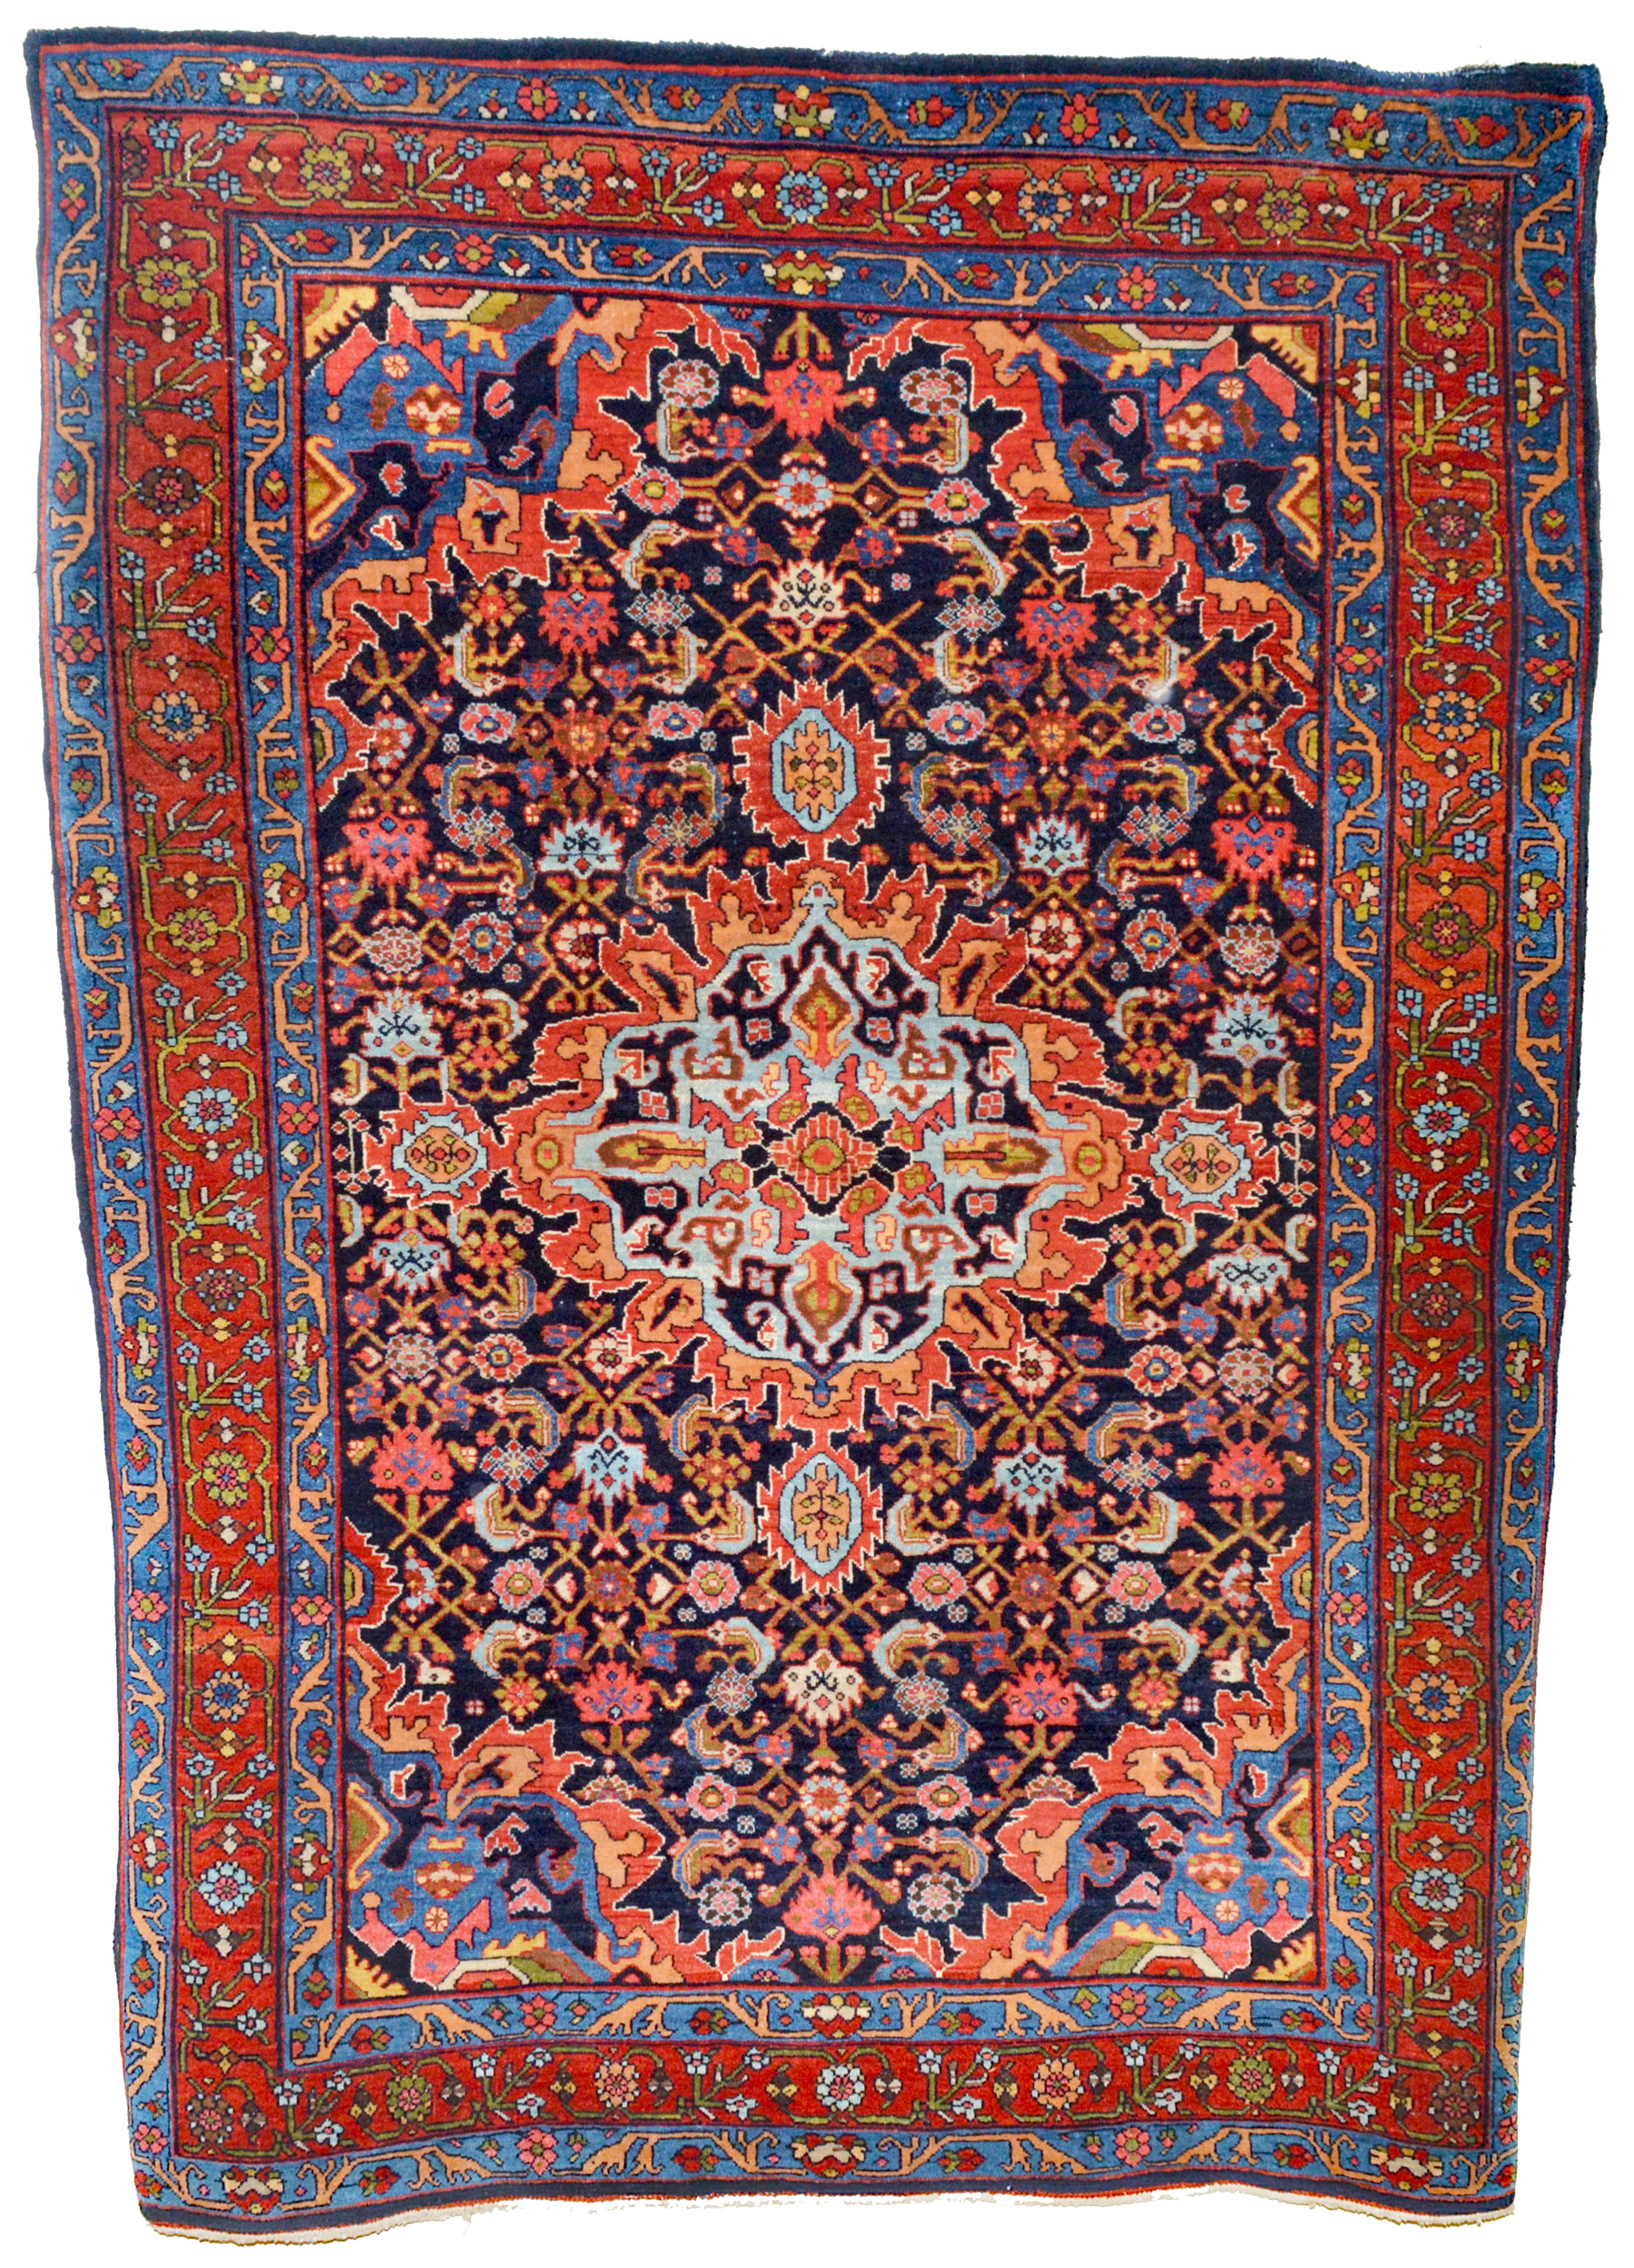 A distinctive antique Persian Bidjar rug with a dramatic sky blue and red medallion on a navy blue field that is decorated with the classical "Herati" design. A red border with scrolling vines and flowers and mid blue guard borders frame the field, circa 1910. Douglas Stock Gallery is the Boston areas most selective dealer in antique Oriental rugs. Shop in South Natick, MA, near Wellesley, Weston, Newton and Brookline, is open by appointment Monday to Saturday.